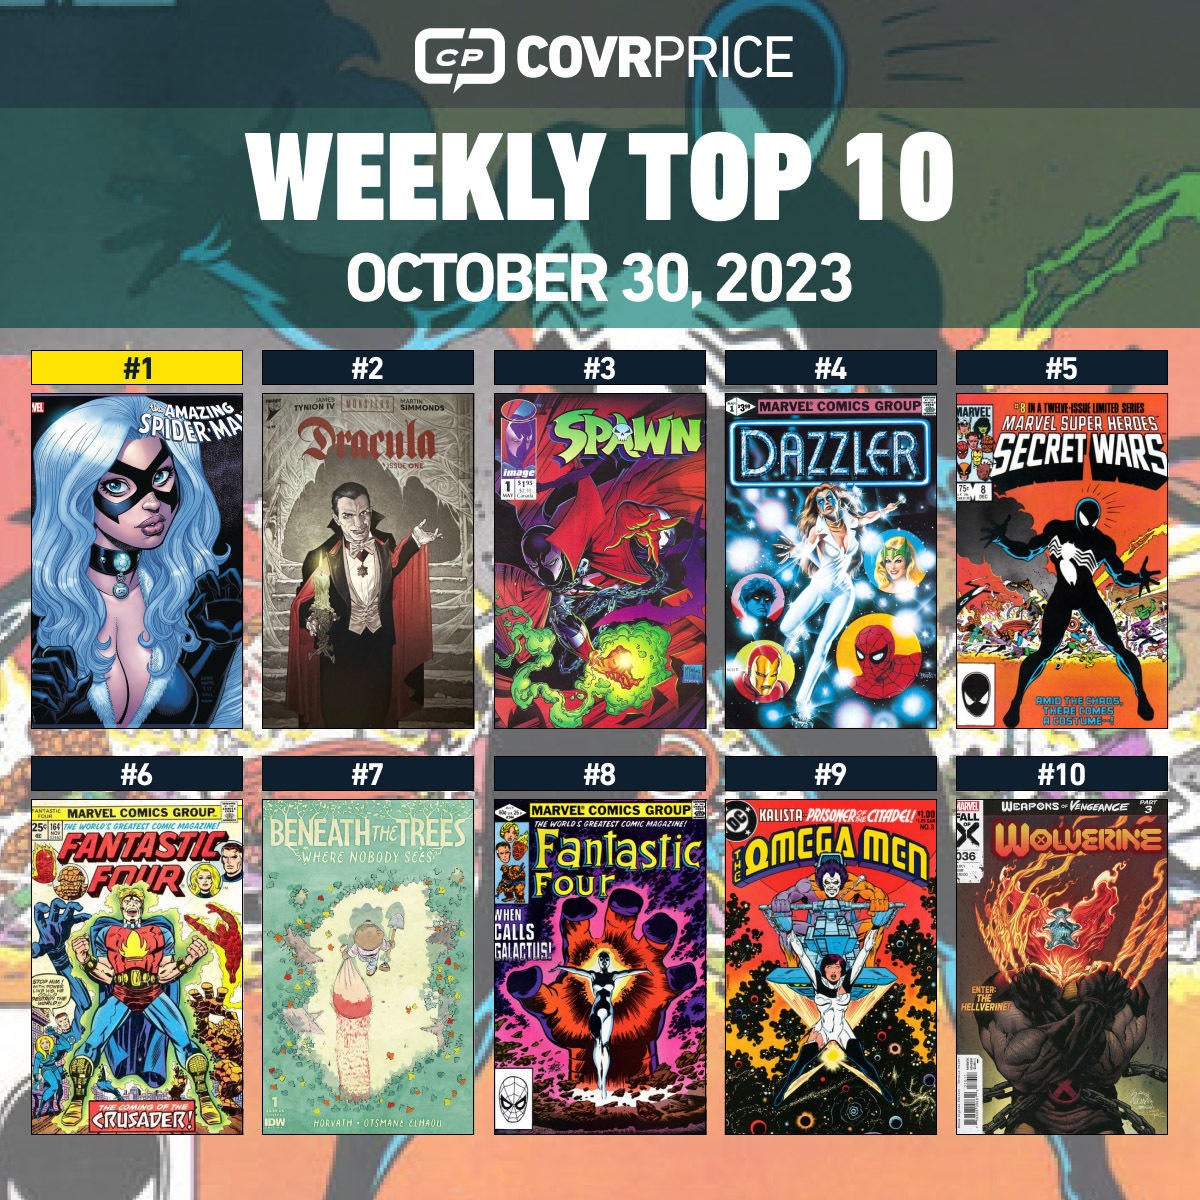 GOOD COMIC BOOKS 4EVER GROUPS WEEKEND NEWS FOR 6/25-27/21 PART 3: TITAN  COMIC BOOKS FOR SEPTEMBER 2021 AND MORE